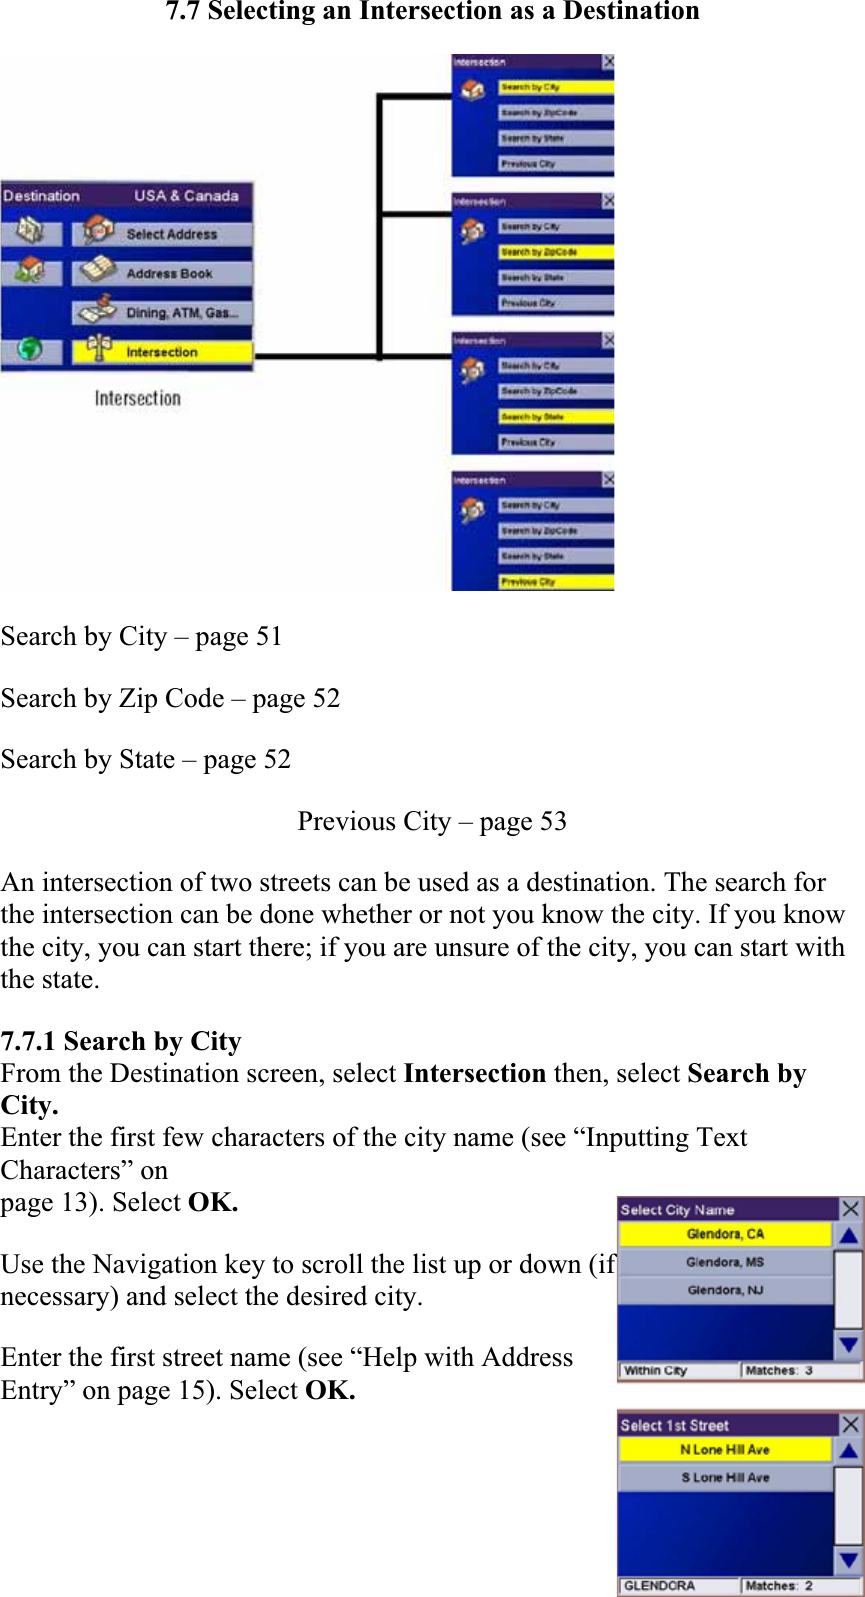 7.7 Selecting an Intersection as a Destination Search by City – page 51  Search by Zip Code – page 52  Search by State – page 52Previous City – page 53  An intersection of two streets can be used as a destination. The search for the intersection can be done whether or not you know the city. If you know the city, you can start there; if you are unsure of the city, you can start with the state.7.7.1 Search by City From the Destination screen, select Intersection then, select Search by City.Enter the first few characters of the city name (see “Inputting Text Characters” on page 13). Select OK. Use the Navigation key to scroll the list up or down (if necessary) and select the desired city.Enter the first street name (see “Help with Address Entry” on page 15). Select OK. 